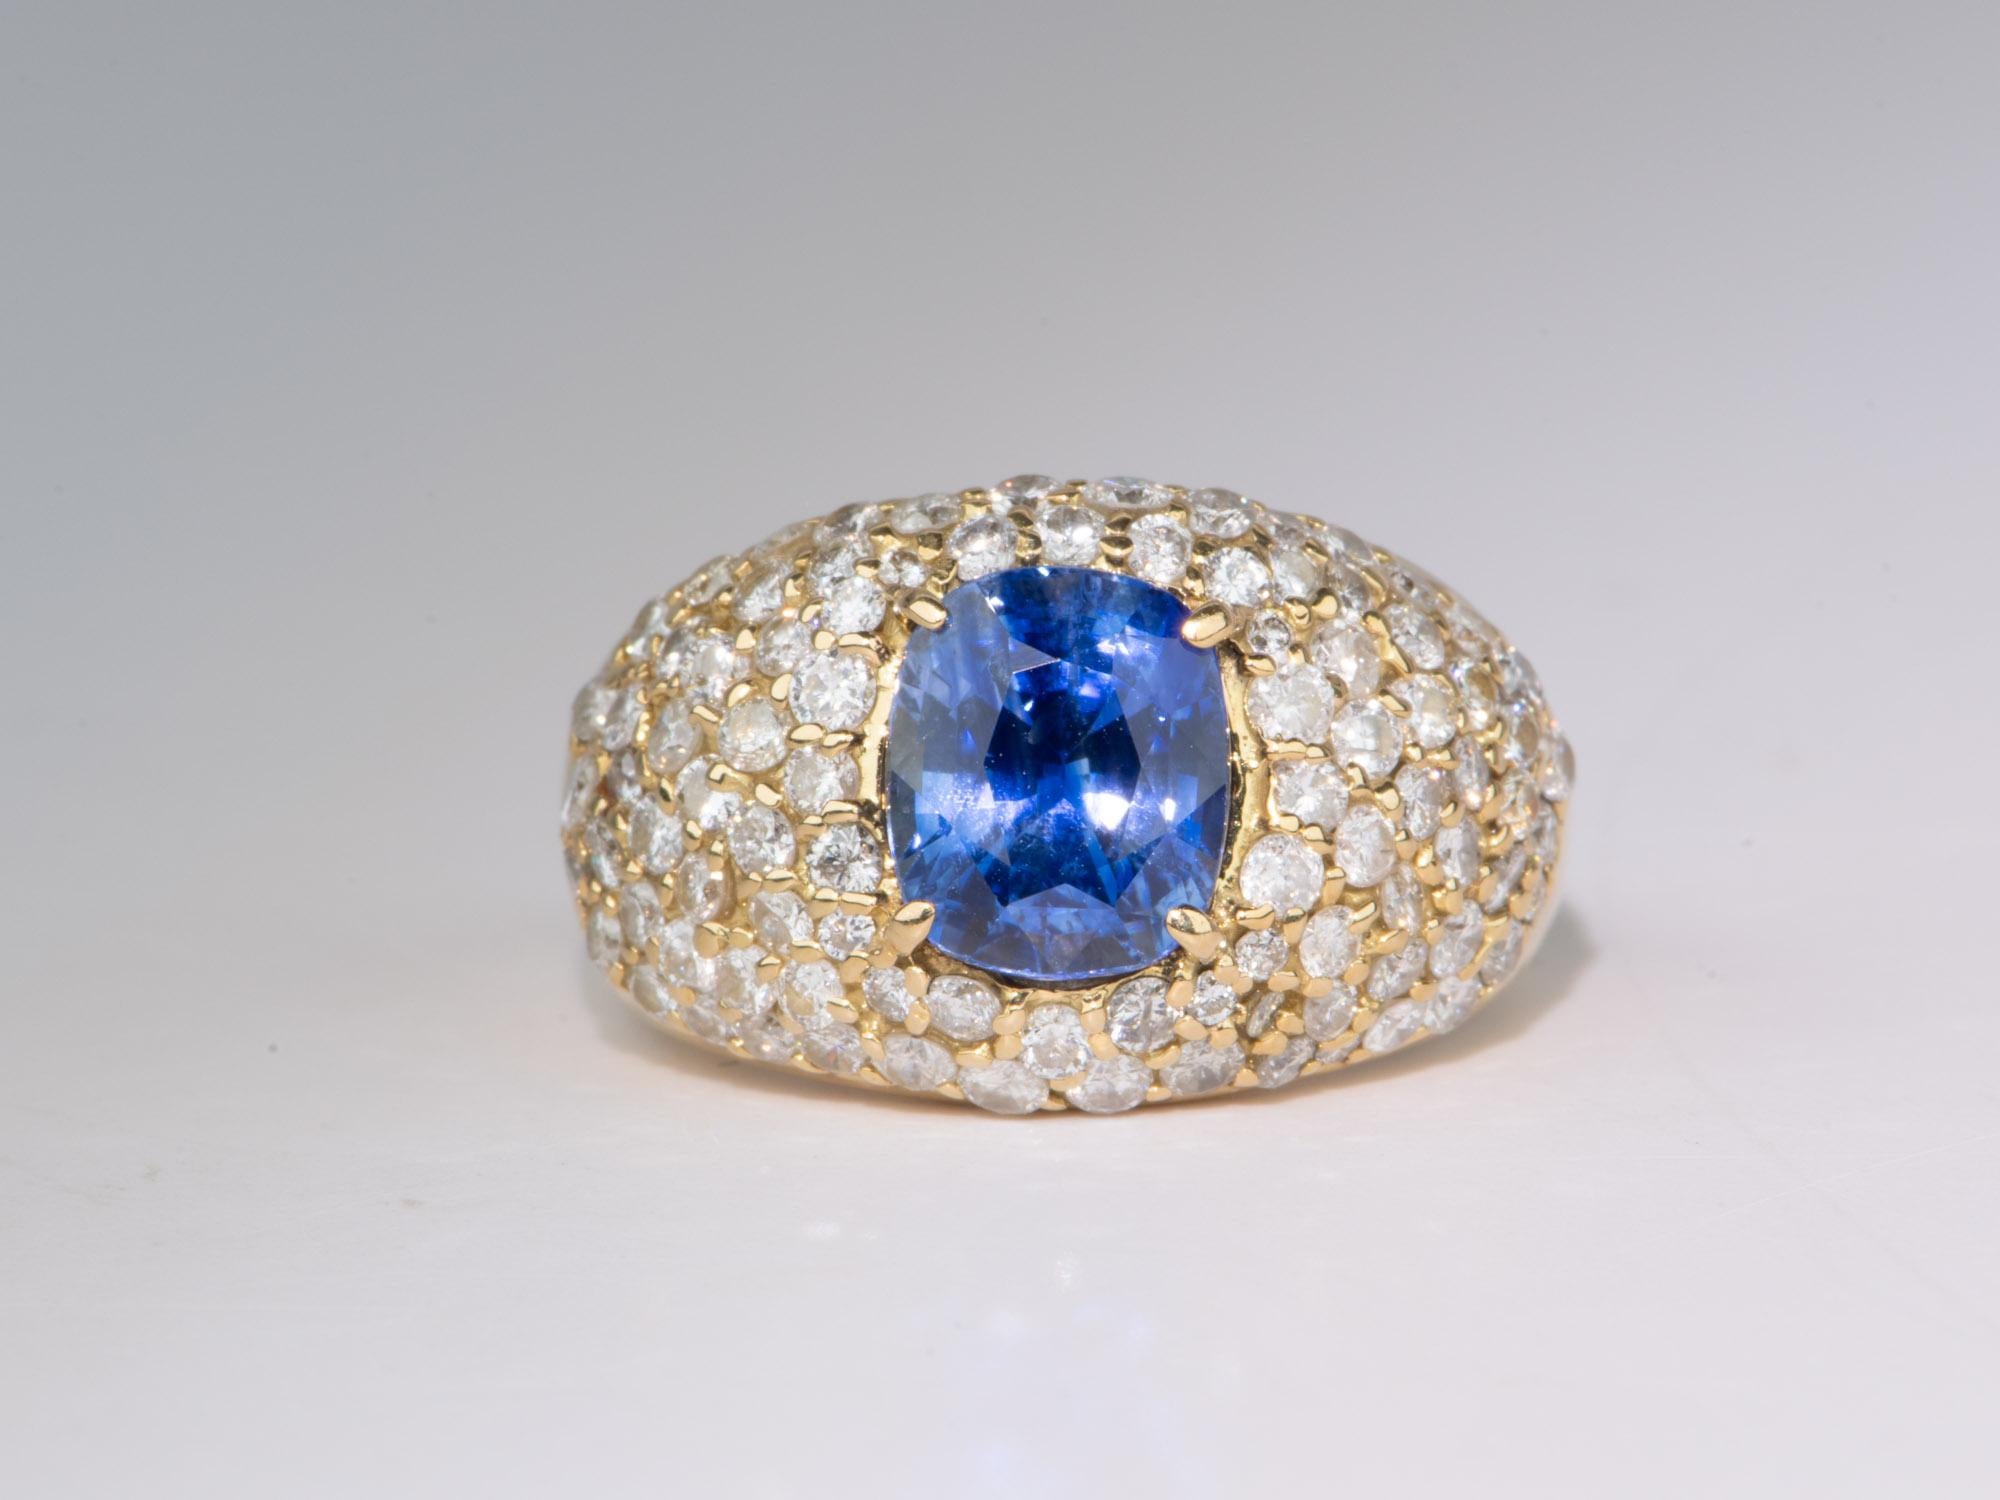   Make a timeless statement with this 3.47ct Sapphire Wide Band Ring with Diamond Pave! Crafted with a breathtaking cornflower blue sapphire in the center in a dome top style, this one-of-a-kind piece will have everyone turning heads for its classic